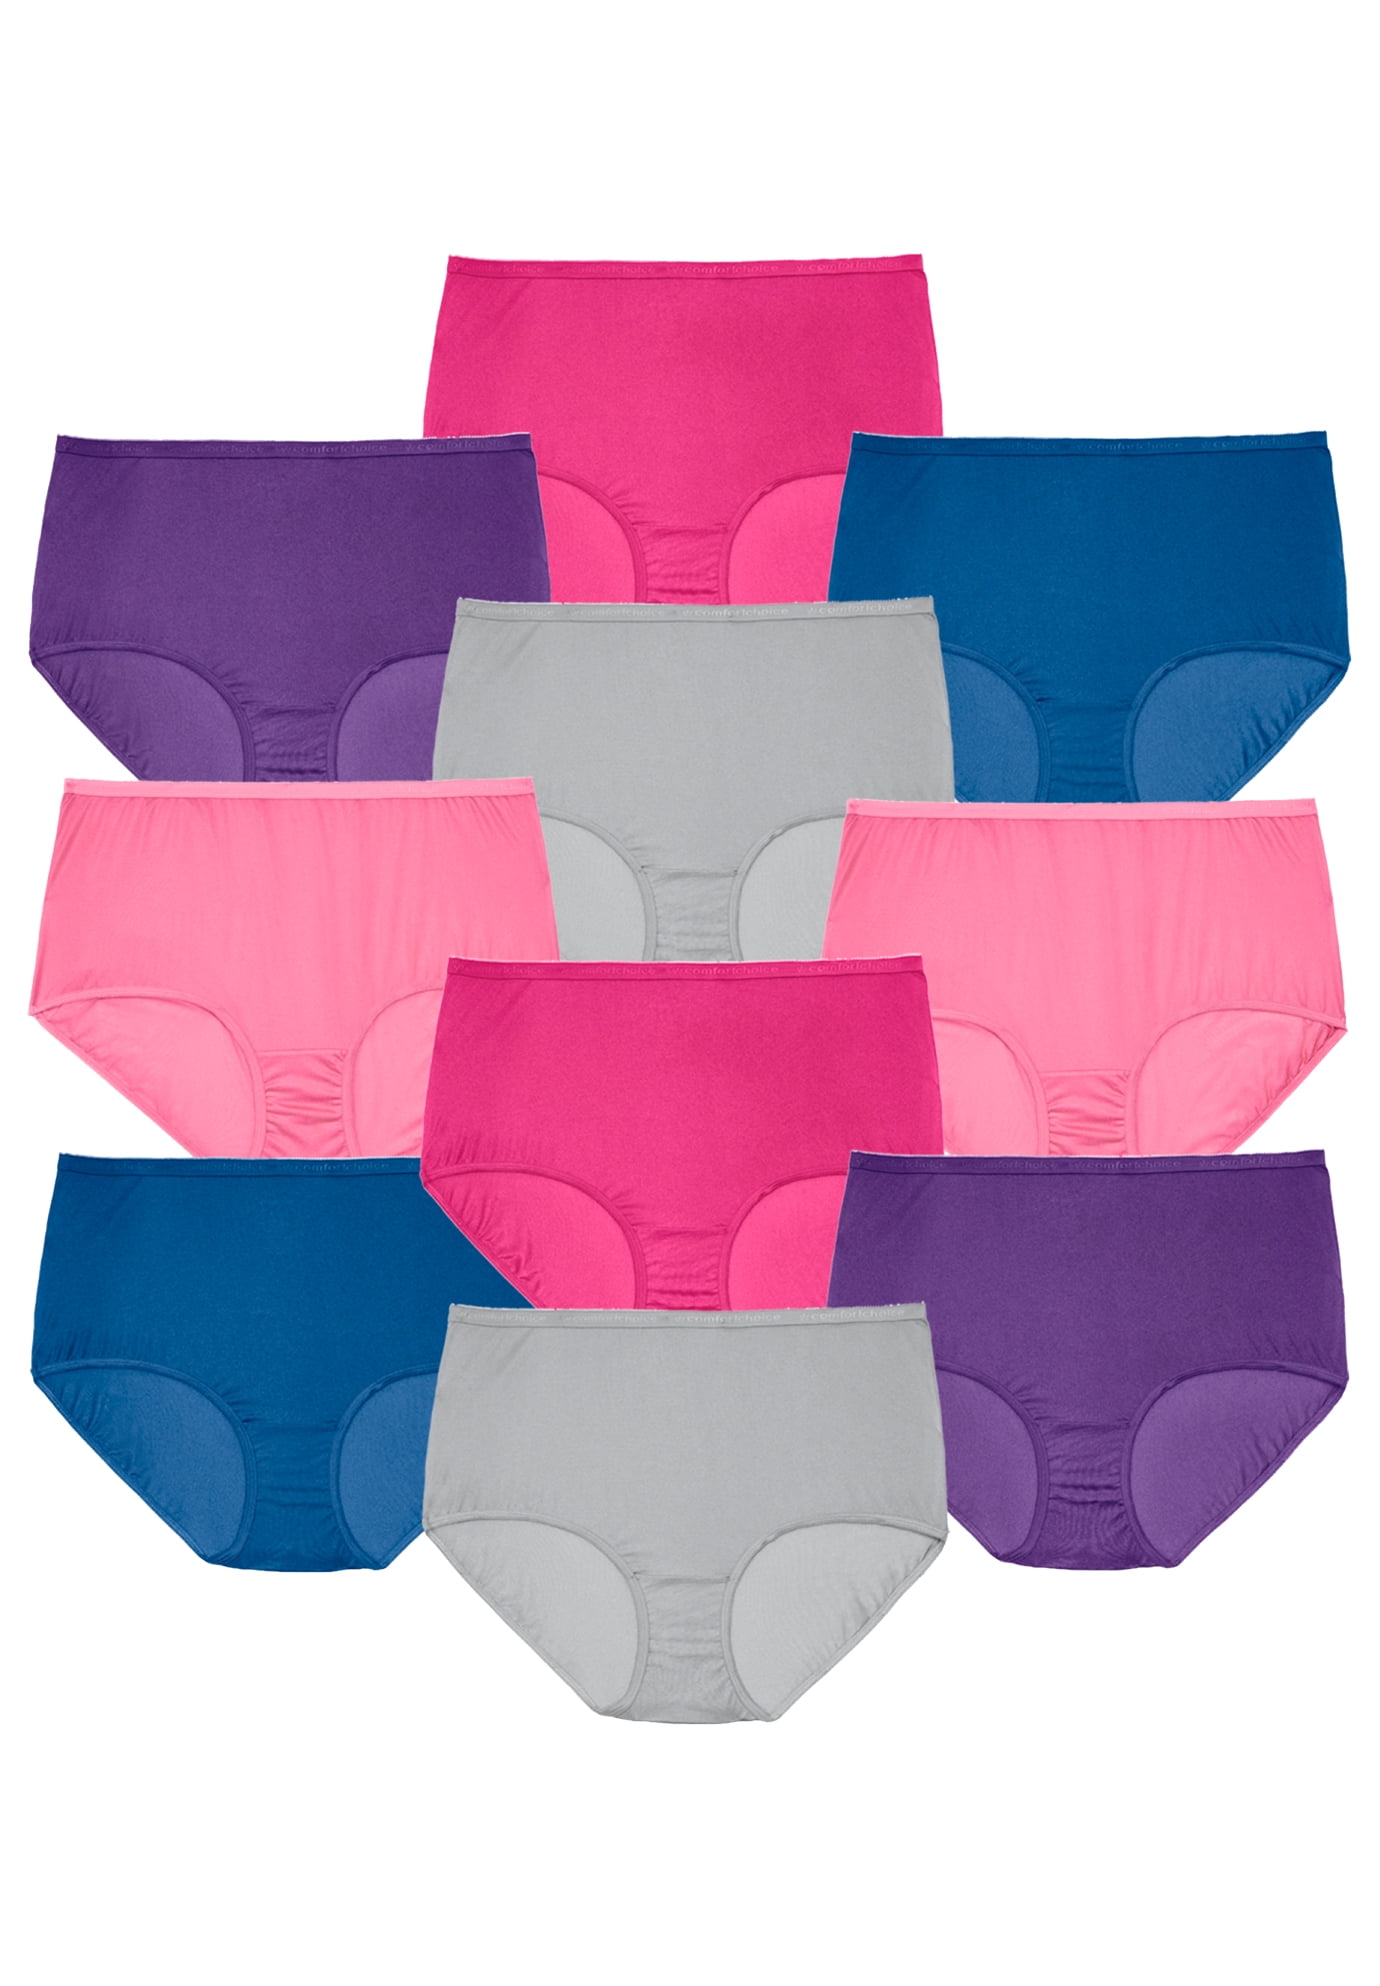 Plus Size Women's Nylon Brief 5-Pack by Comfort Choice in Bright